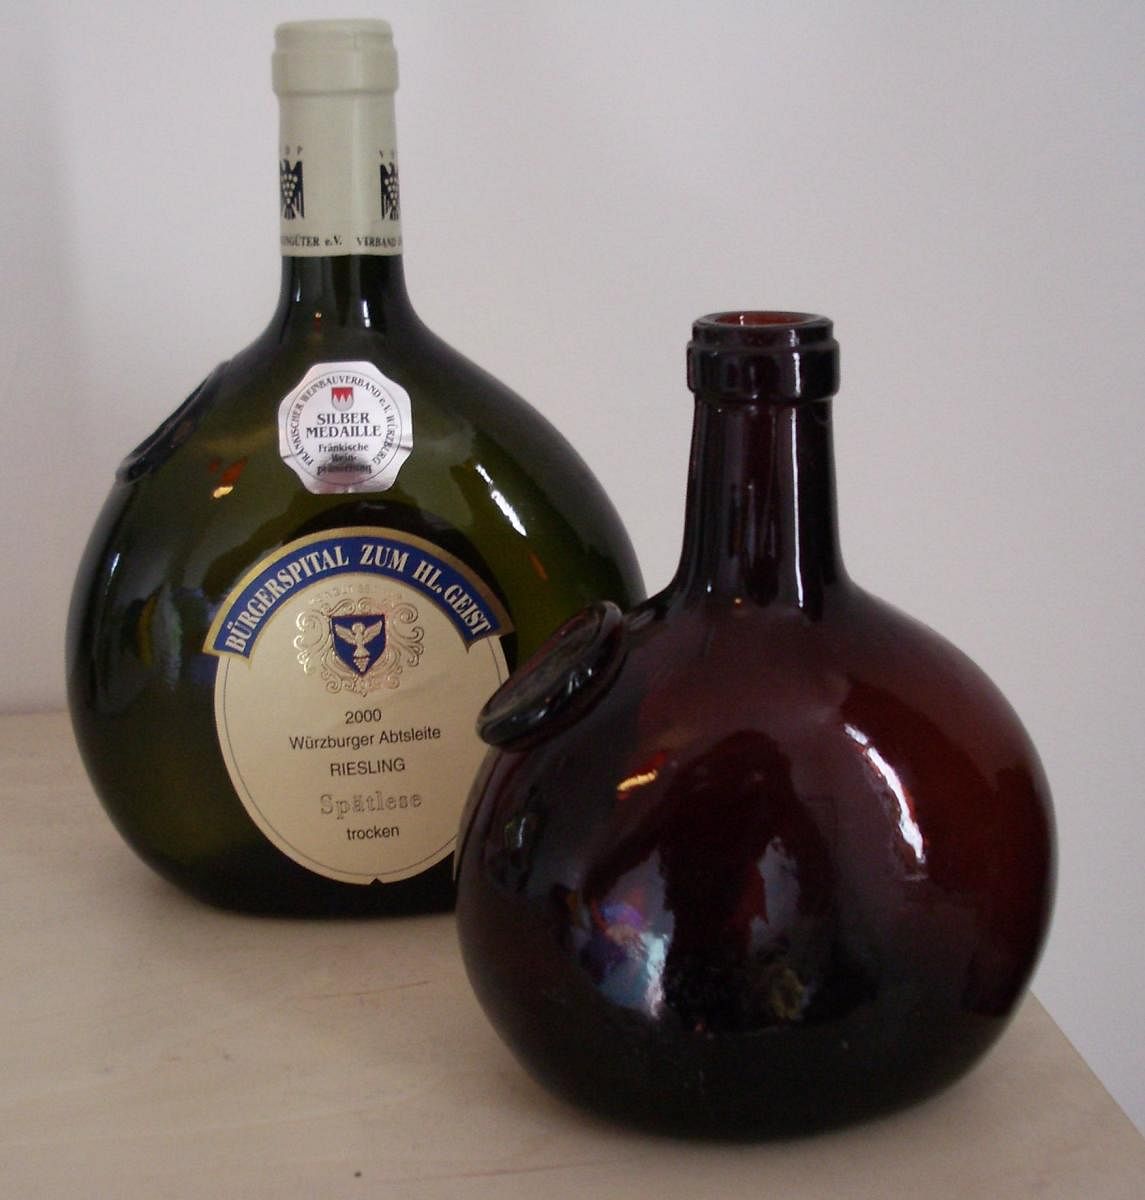 German wine from Franken in the characteristic round bottles (Bocksbeutel). PIC COURTESY WIKIPEDIA